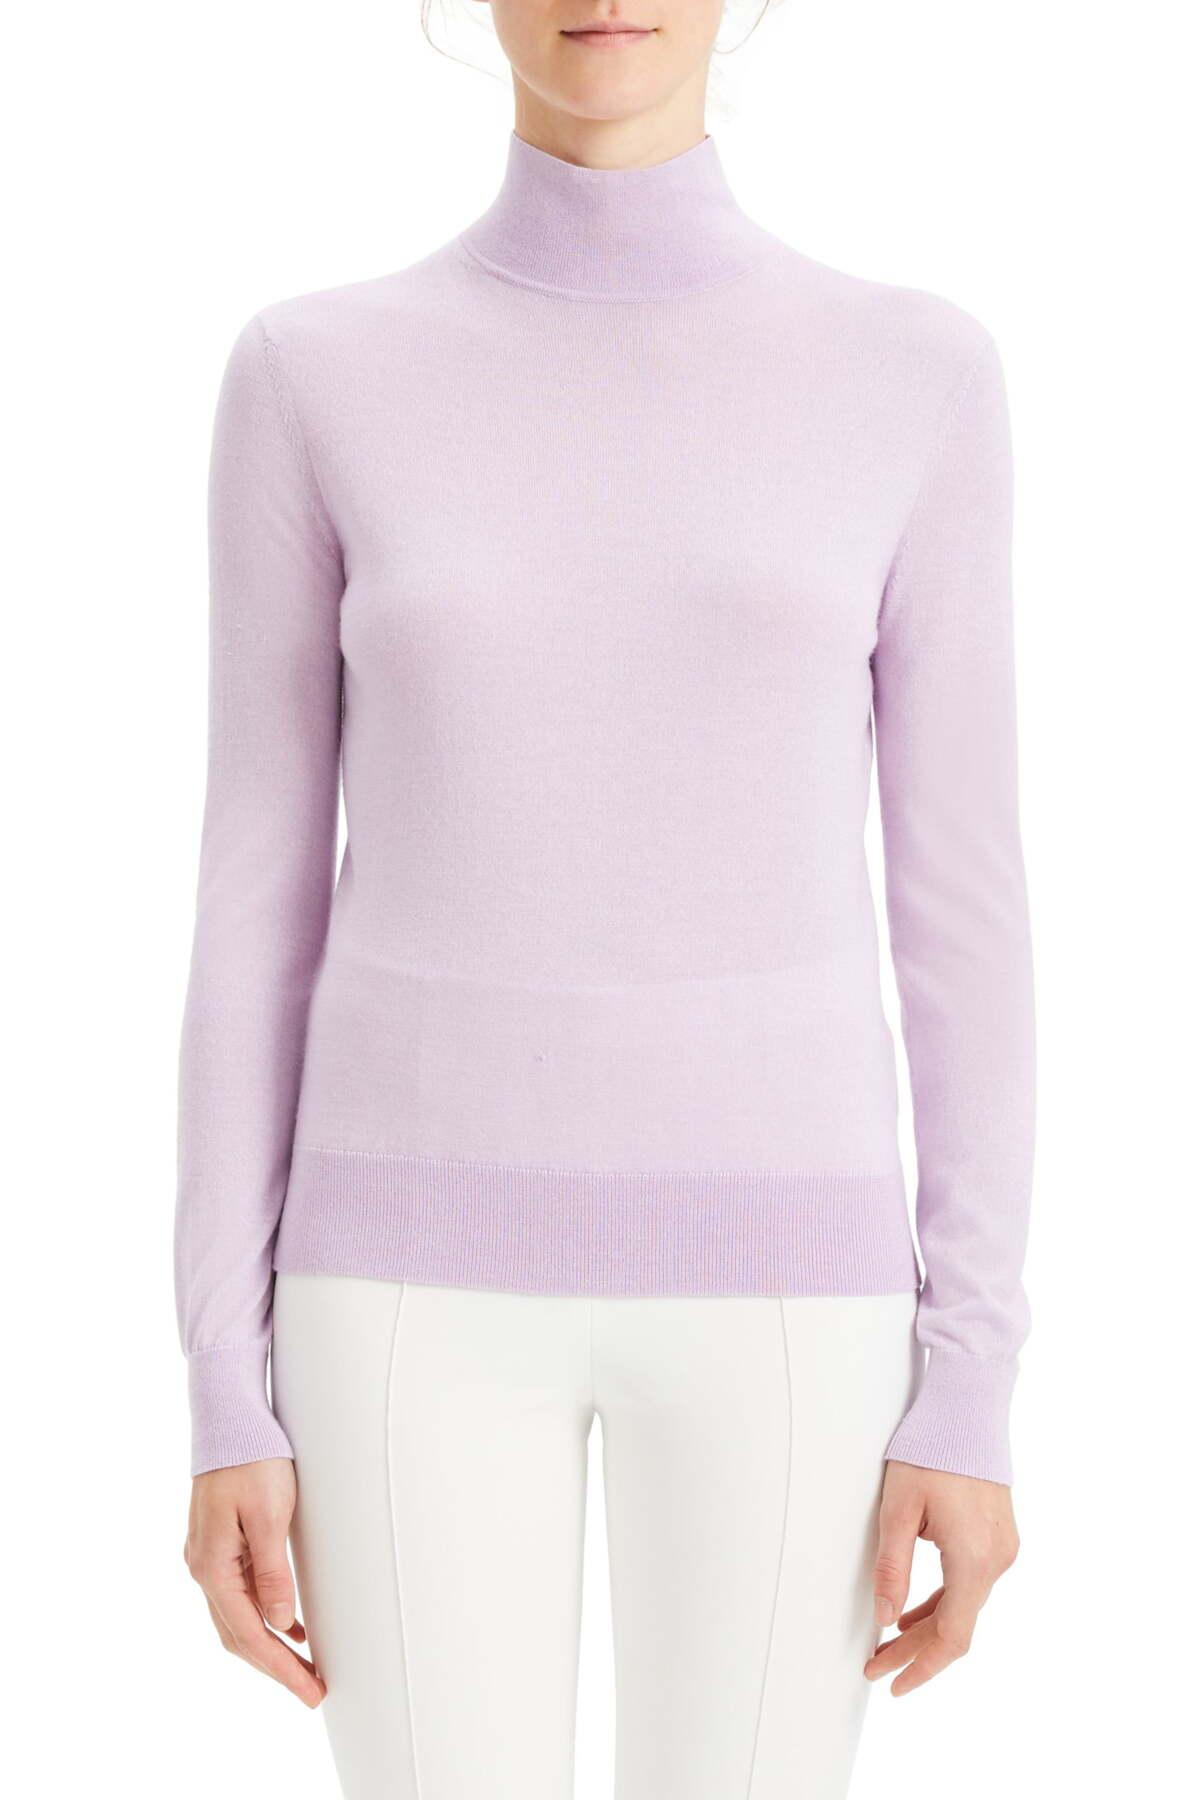 Theory Silk Foundation Mock Neck Sweater in Pink Lilac (Pink) - Lyst